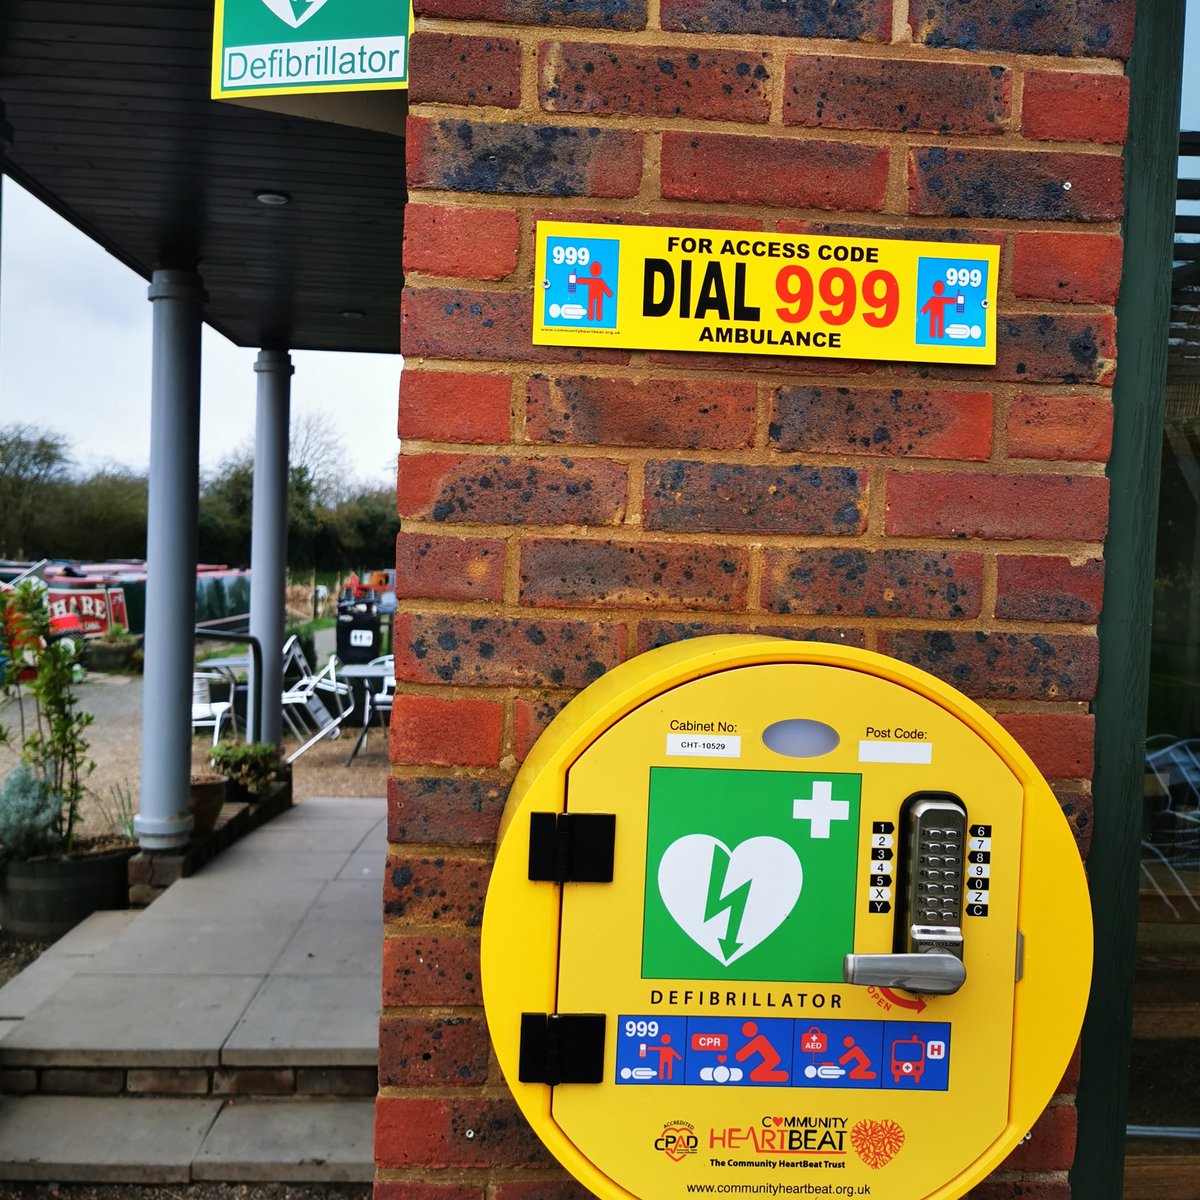 Hello,

We're raising £1300 to We are raising money to purchase a defibrilator and cabinet to install at top lock Atherstone lock flight.
Please donate to my JustGiving Crowdfunding Page and help make it happen:

justgiving.com/crowdfunding/A…

Thanks for your support